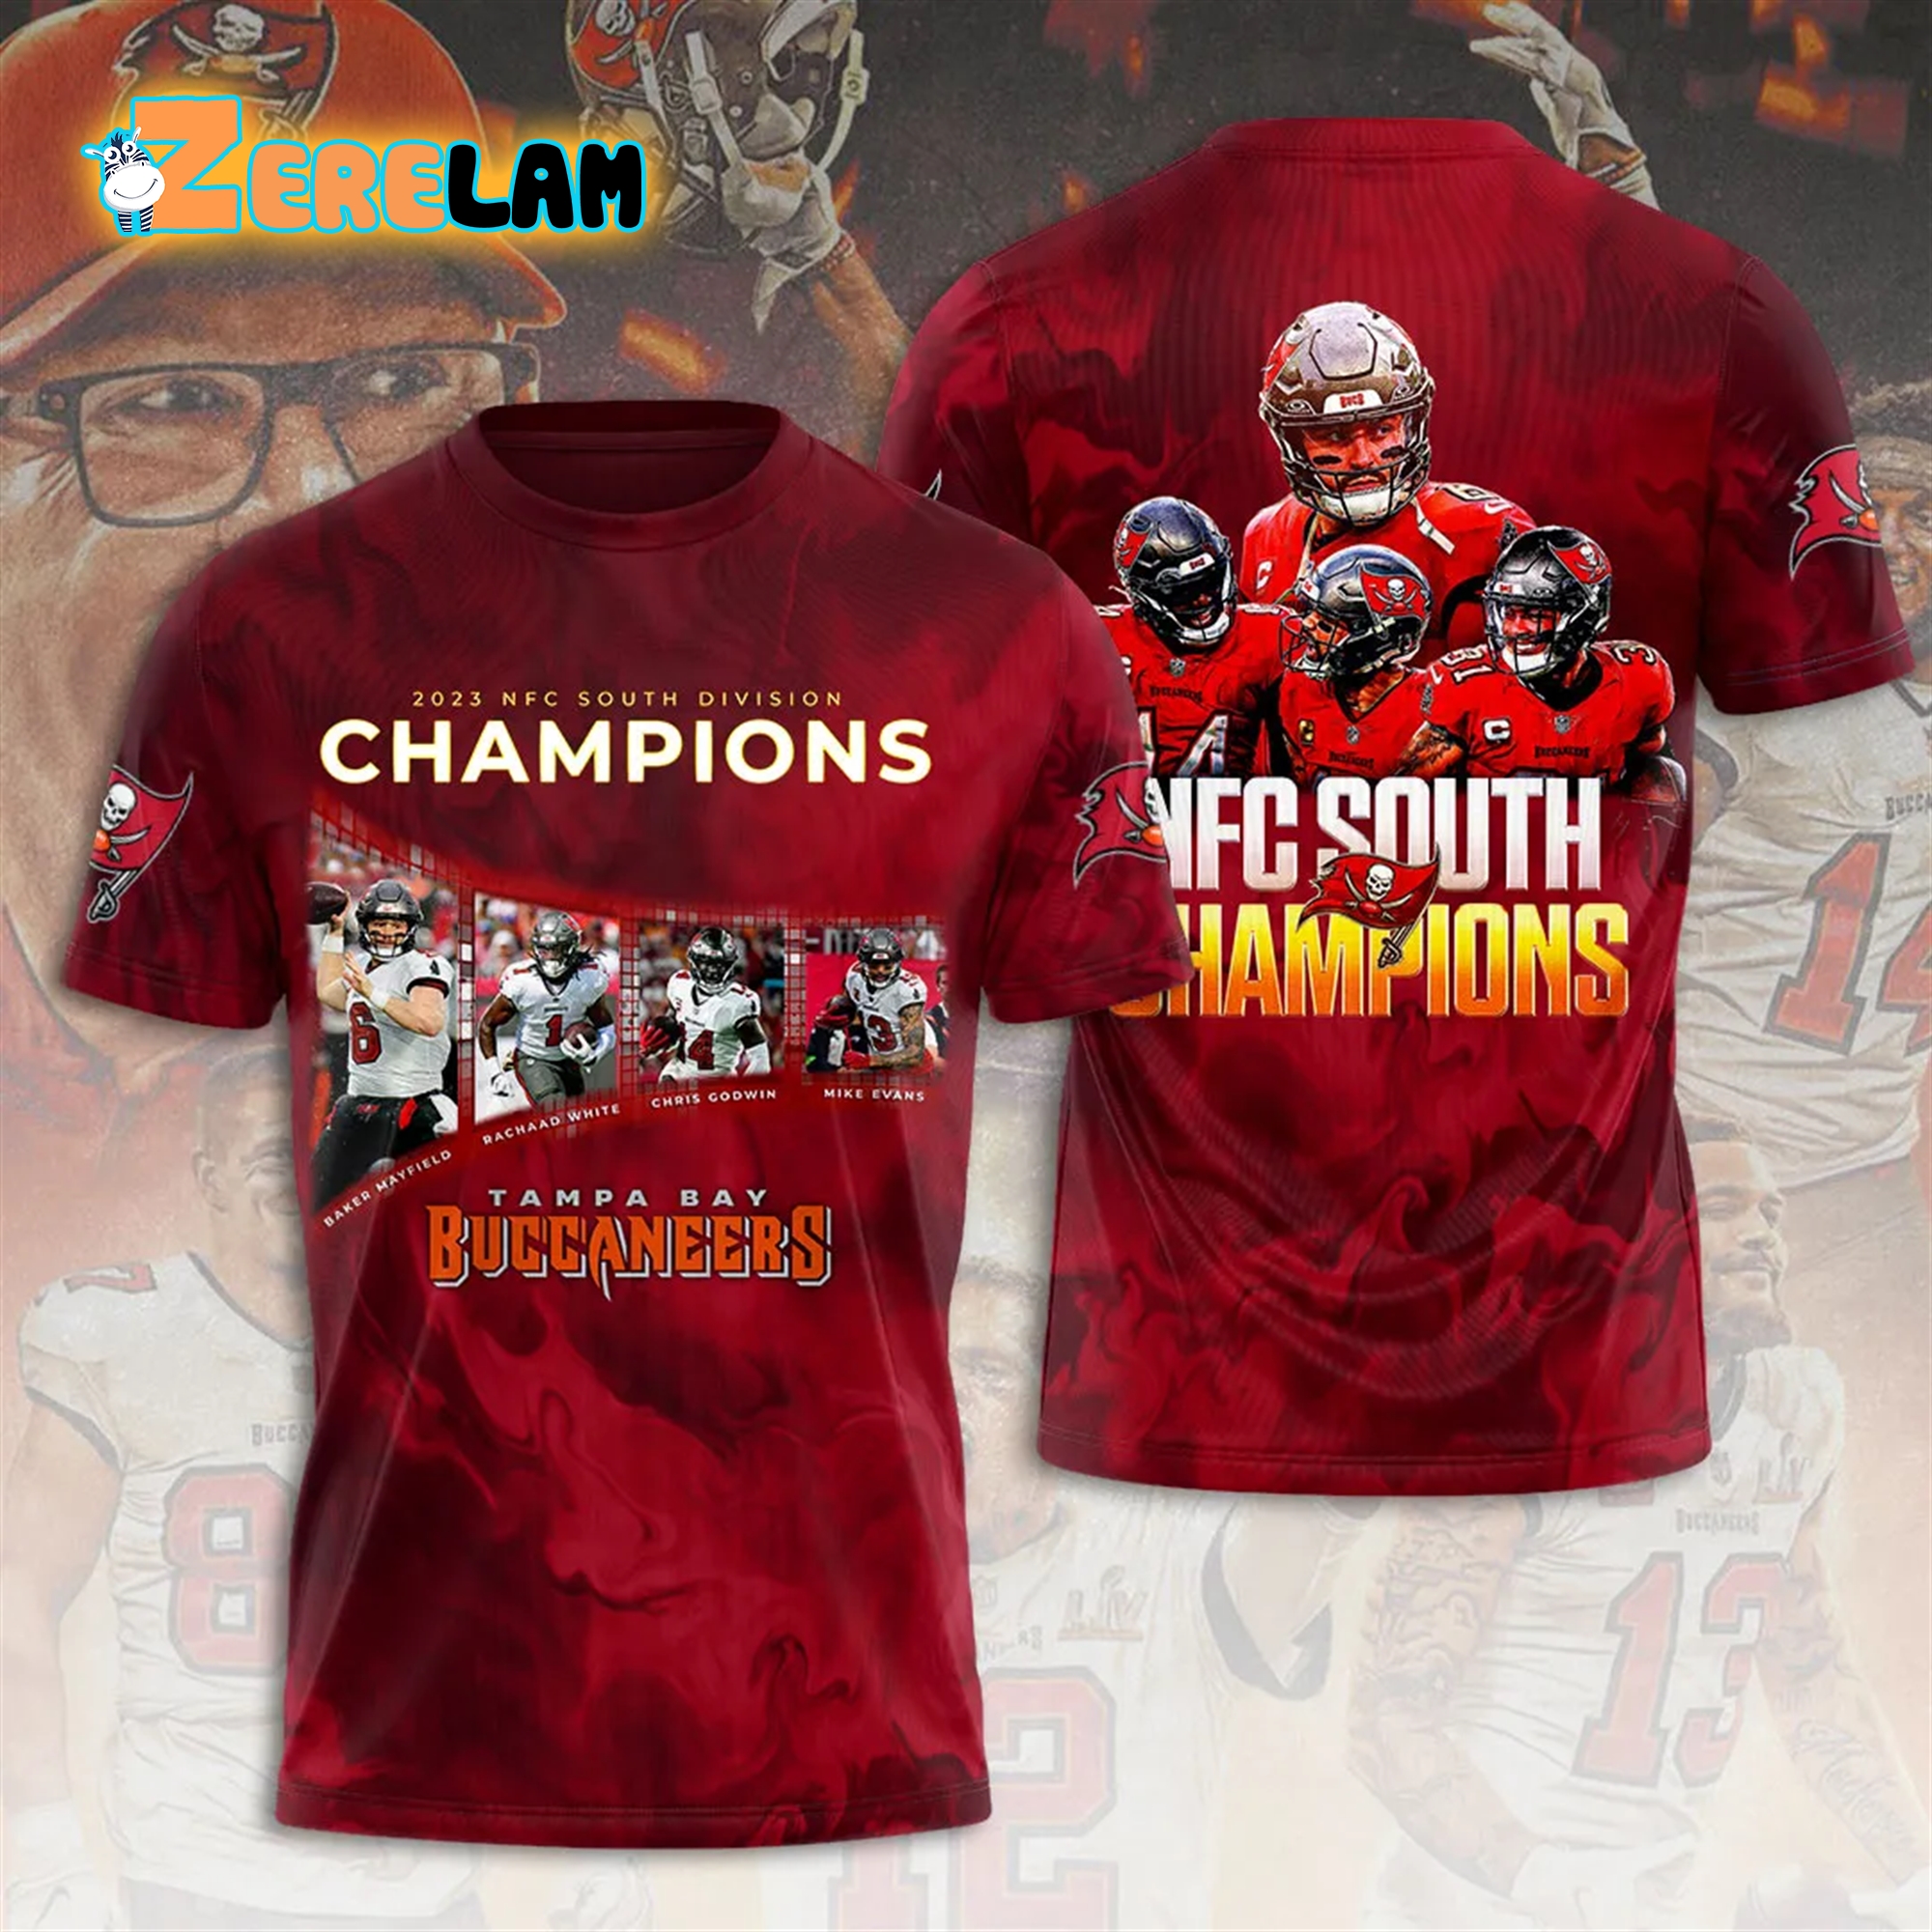 Buccaneers 2023 NFC South Division Champions Shirt - Zerelam